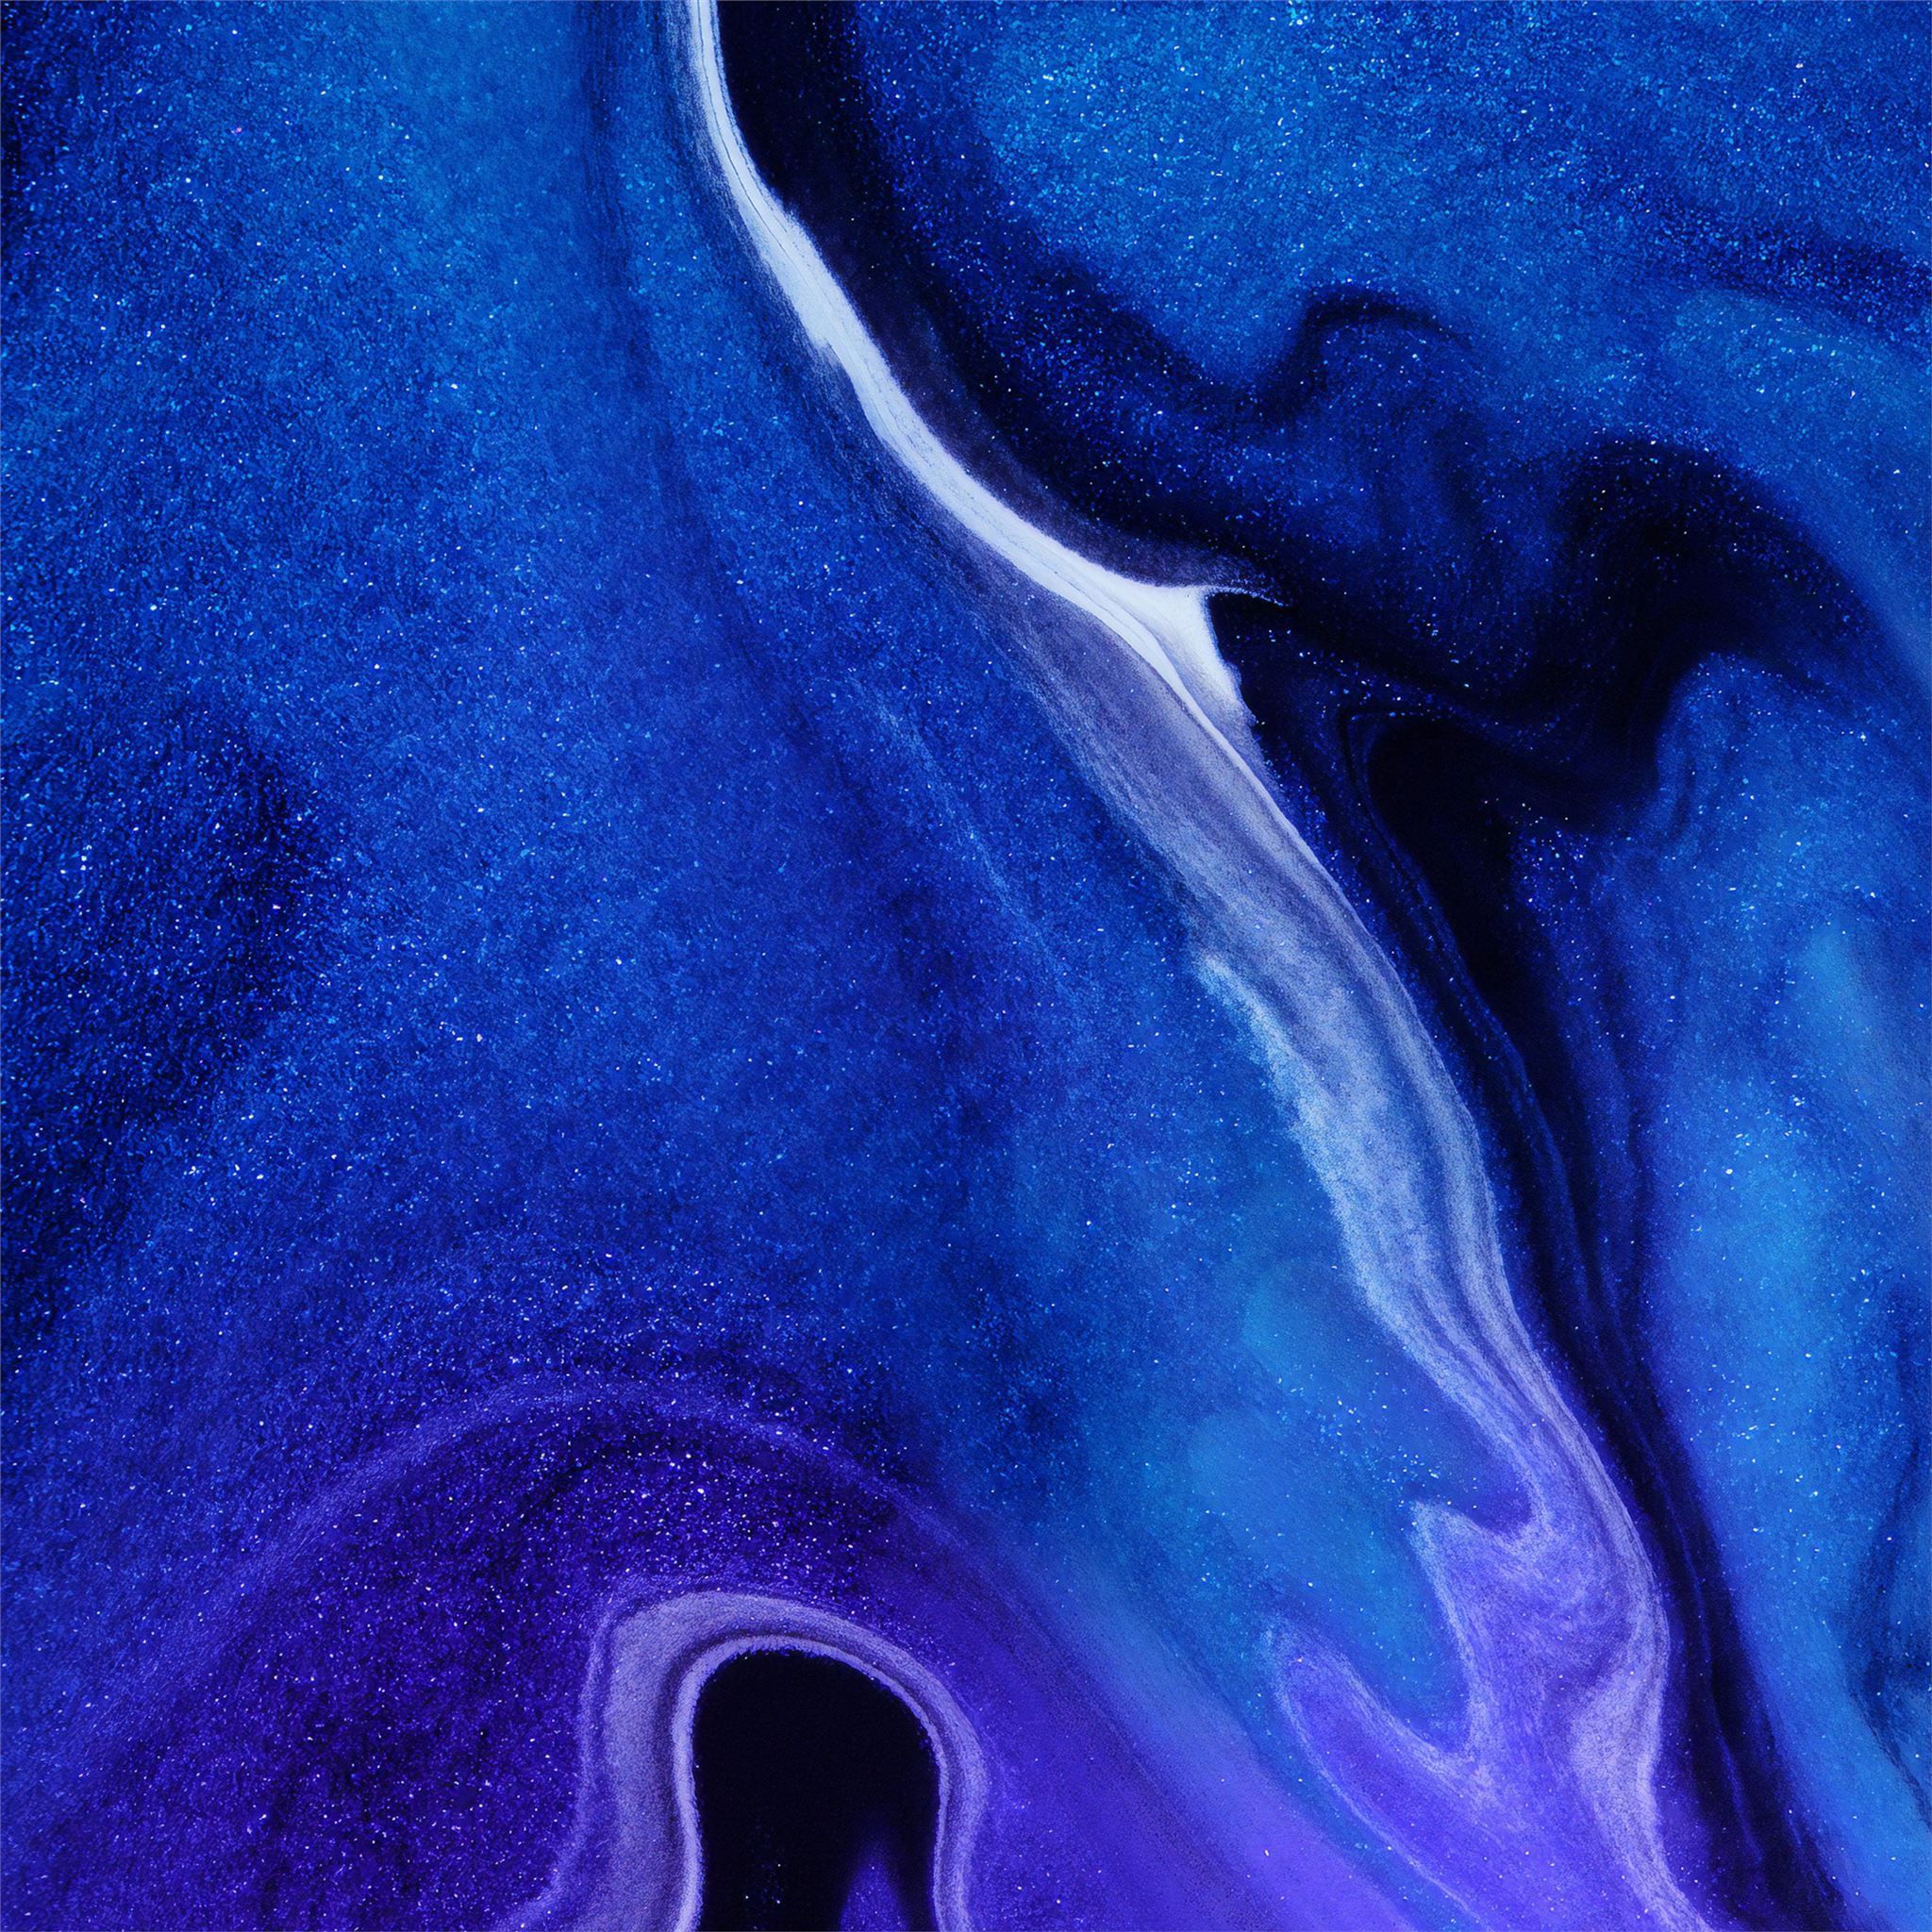 A blue and purple abstract painting - Dark blue